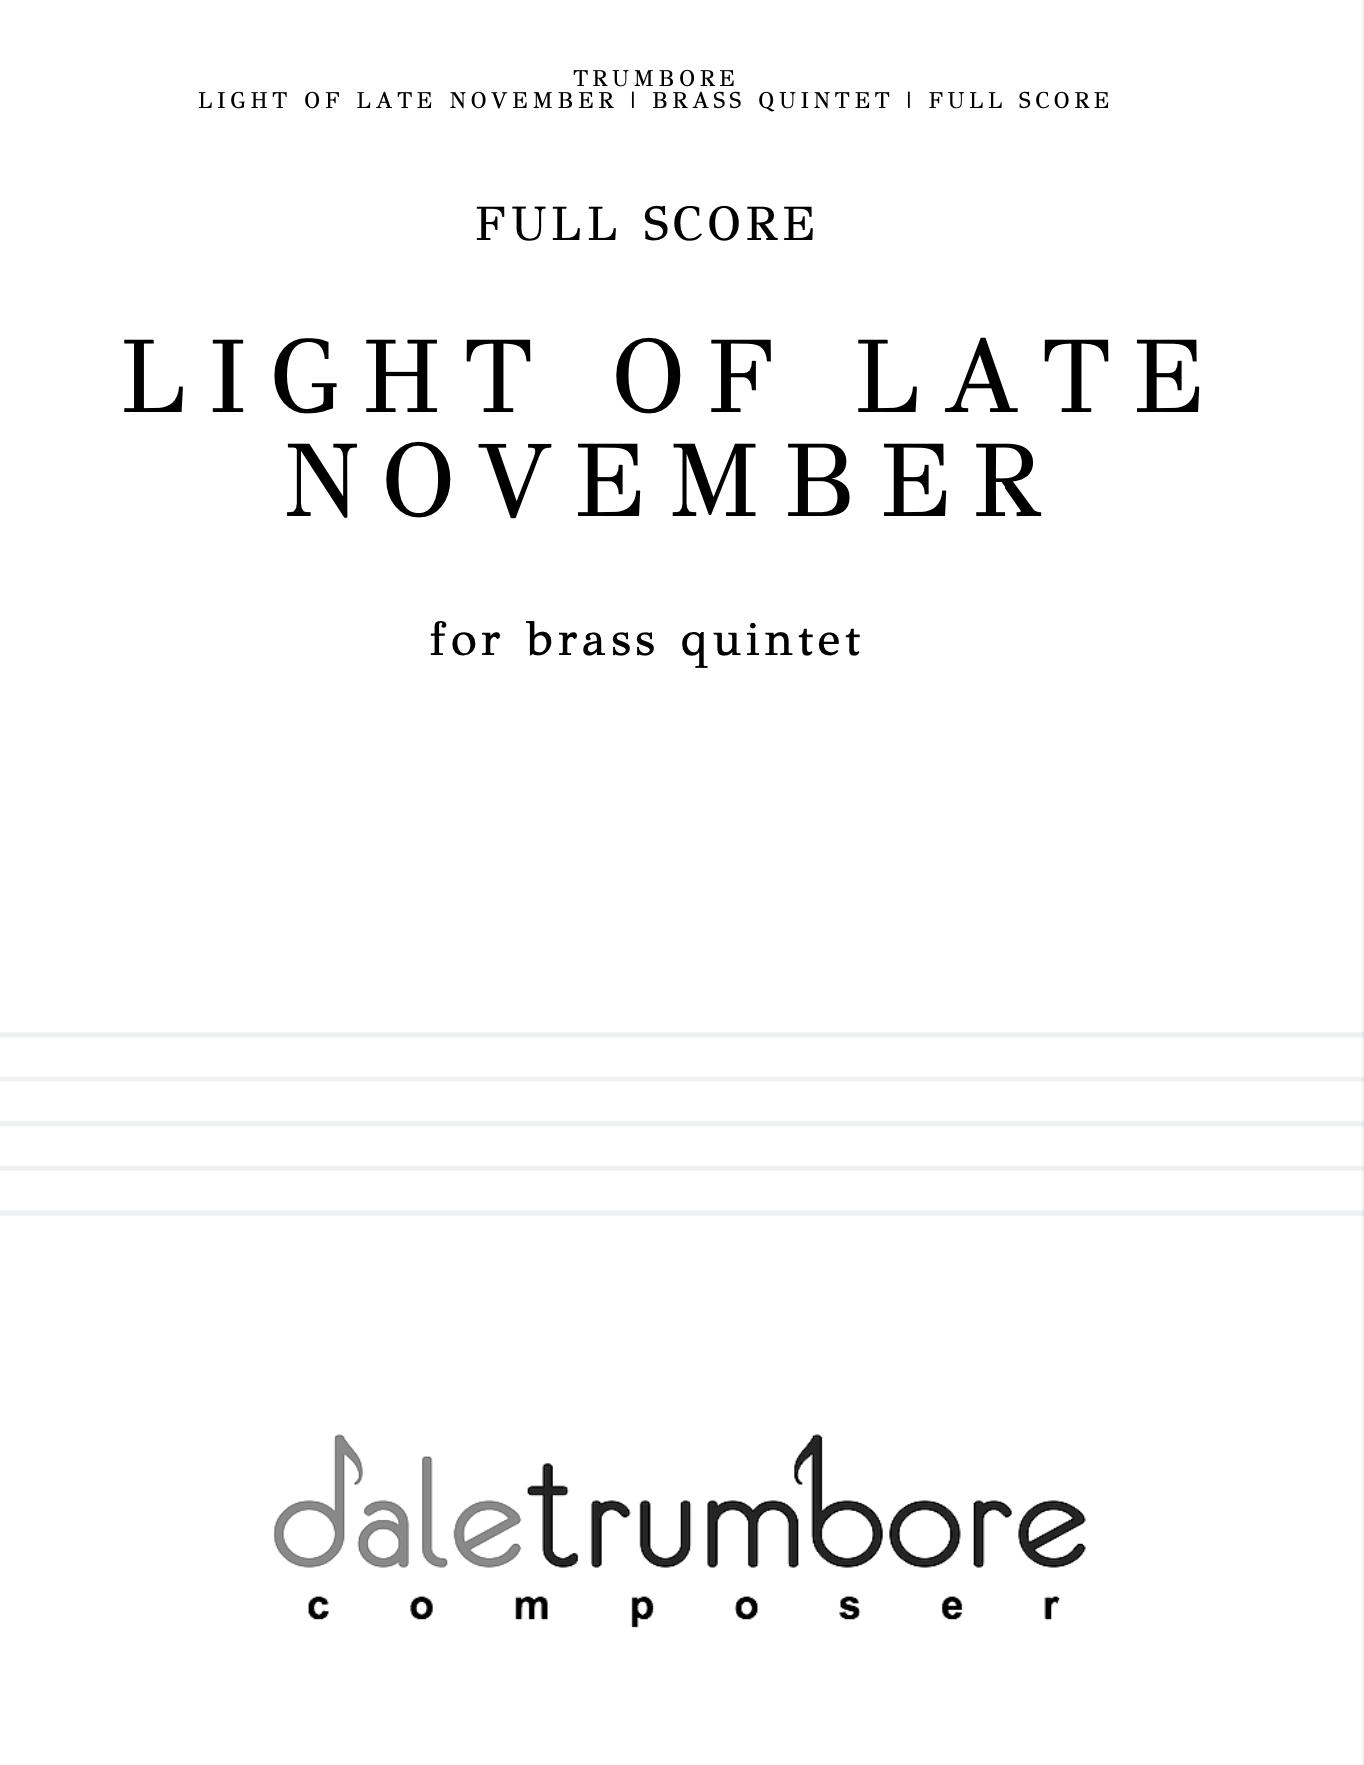 Light Of Late November by Dale Trumbore